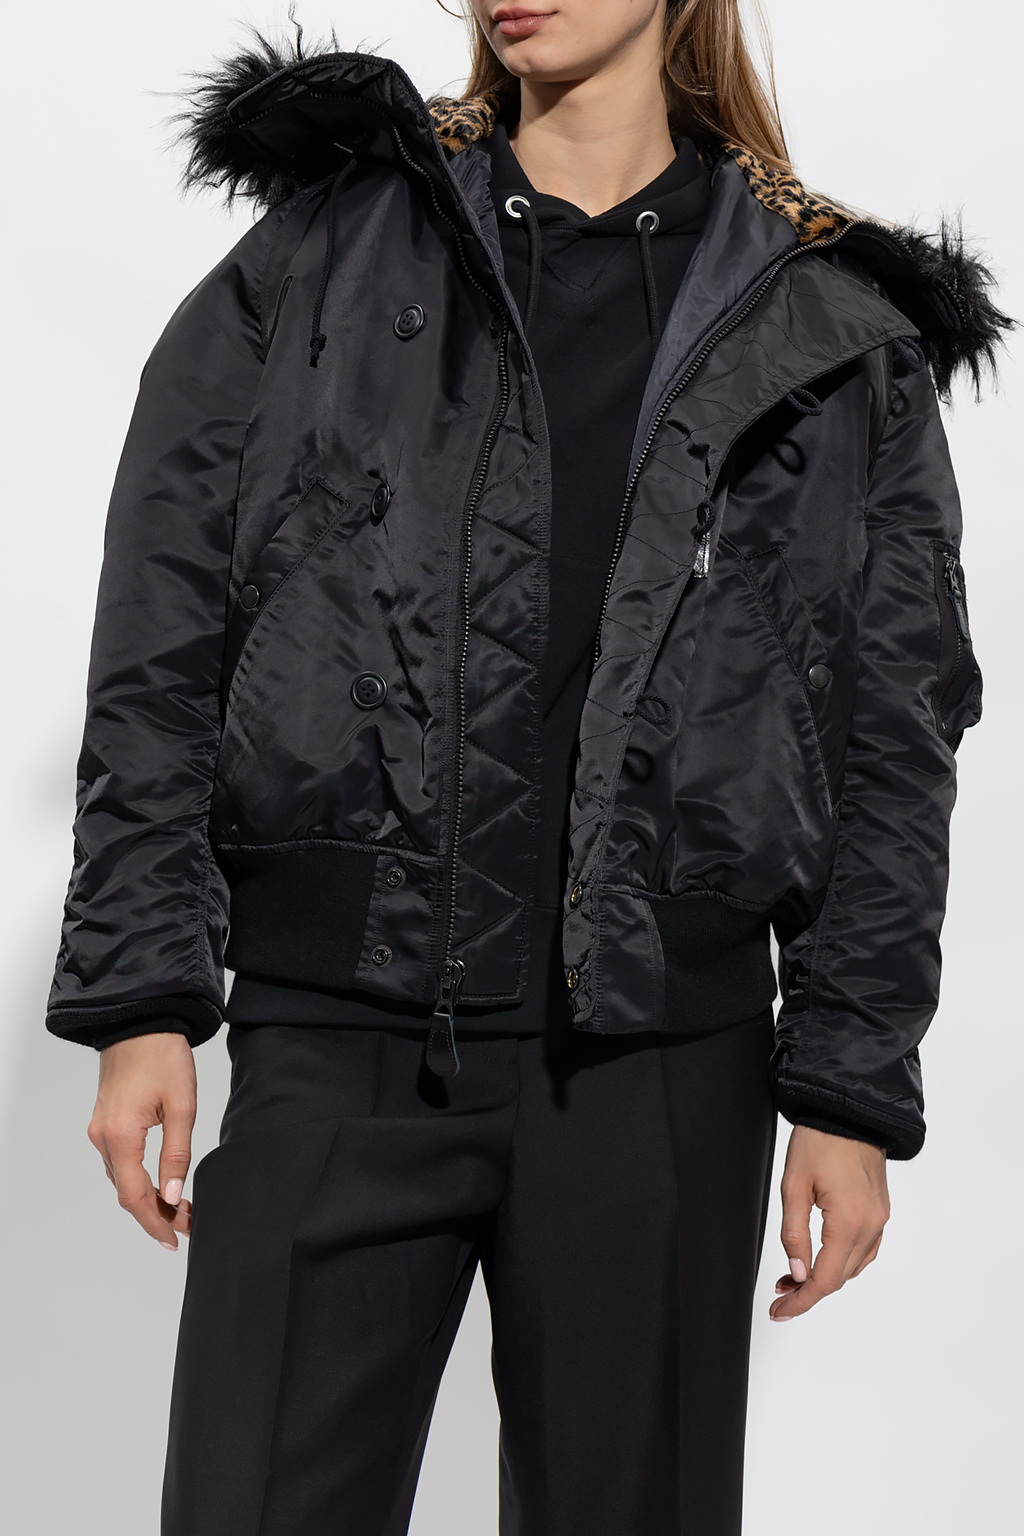 Junya Watanabe Comme des Garçons showcases the latest range which features hoodies